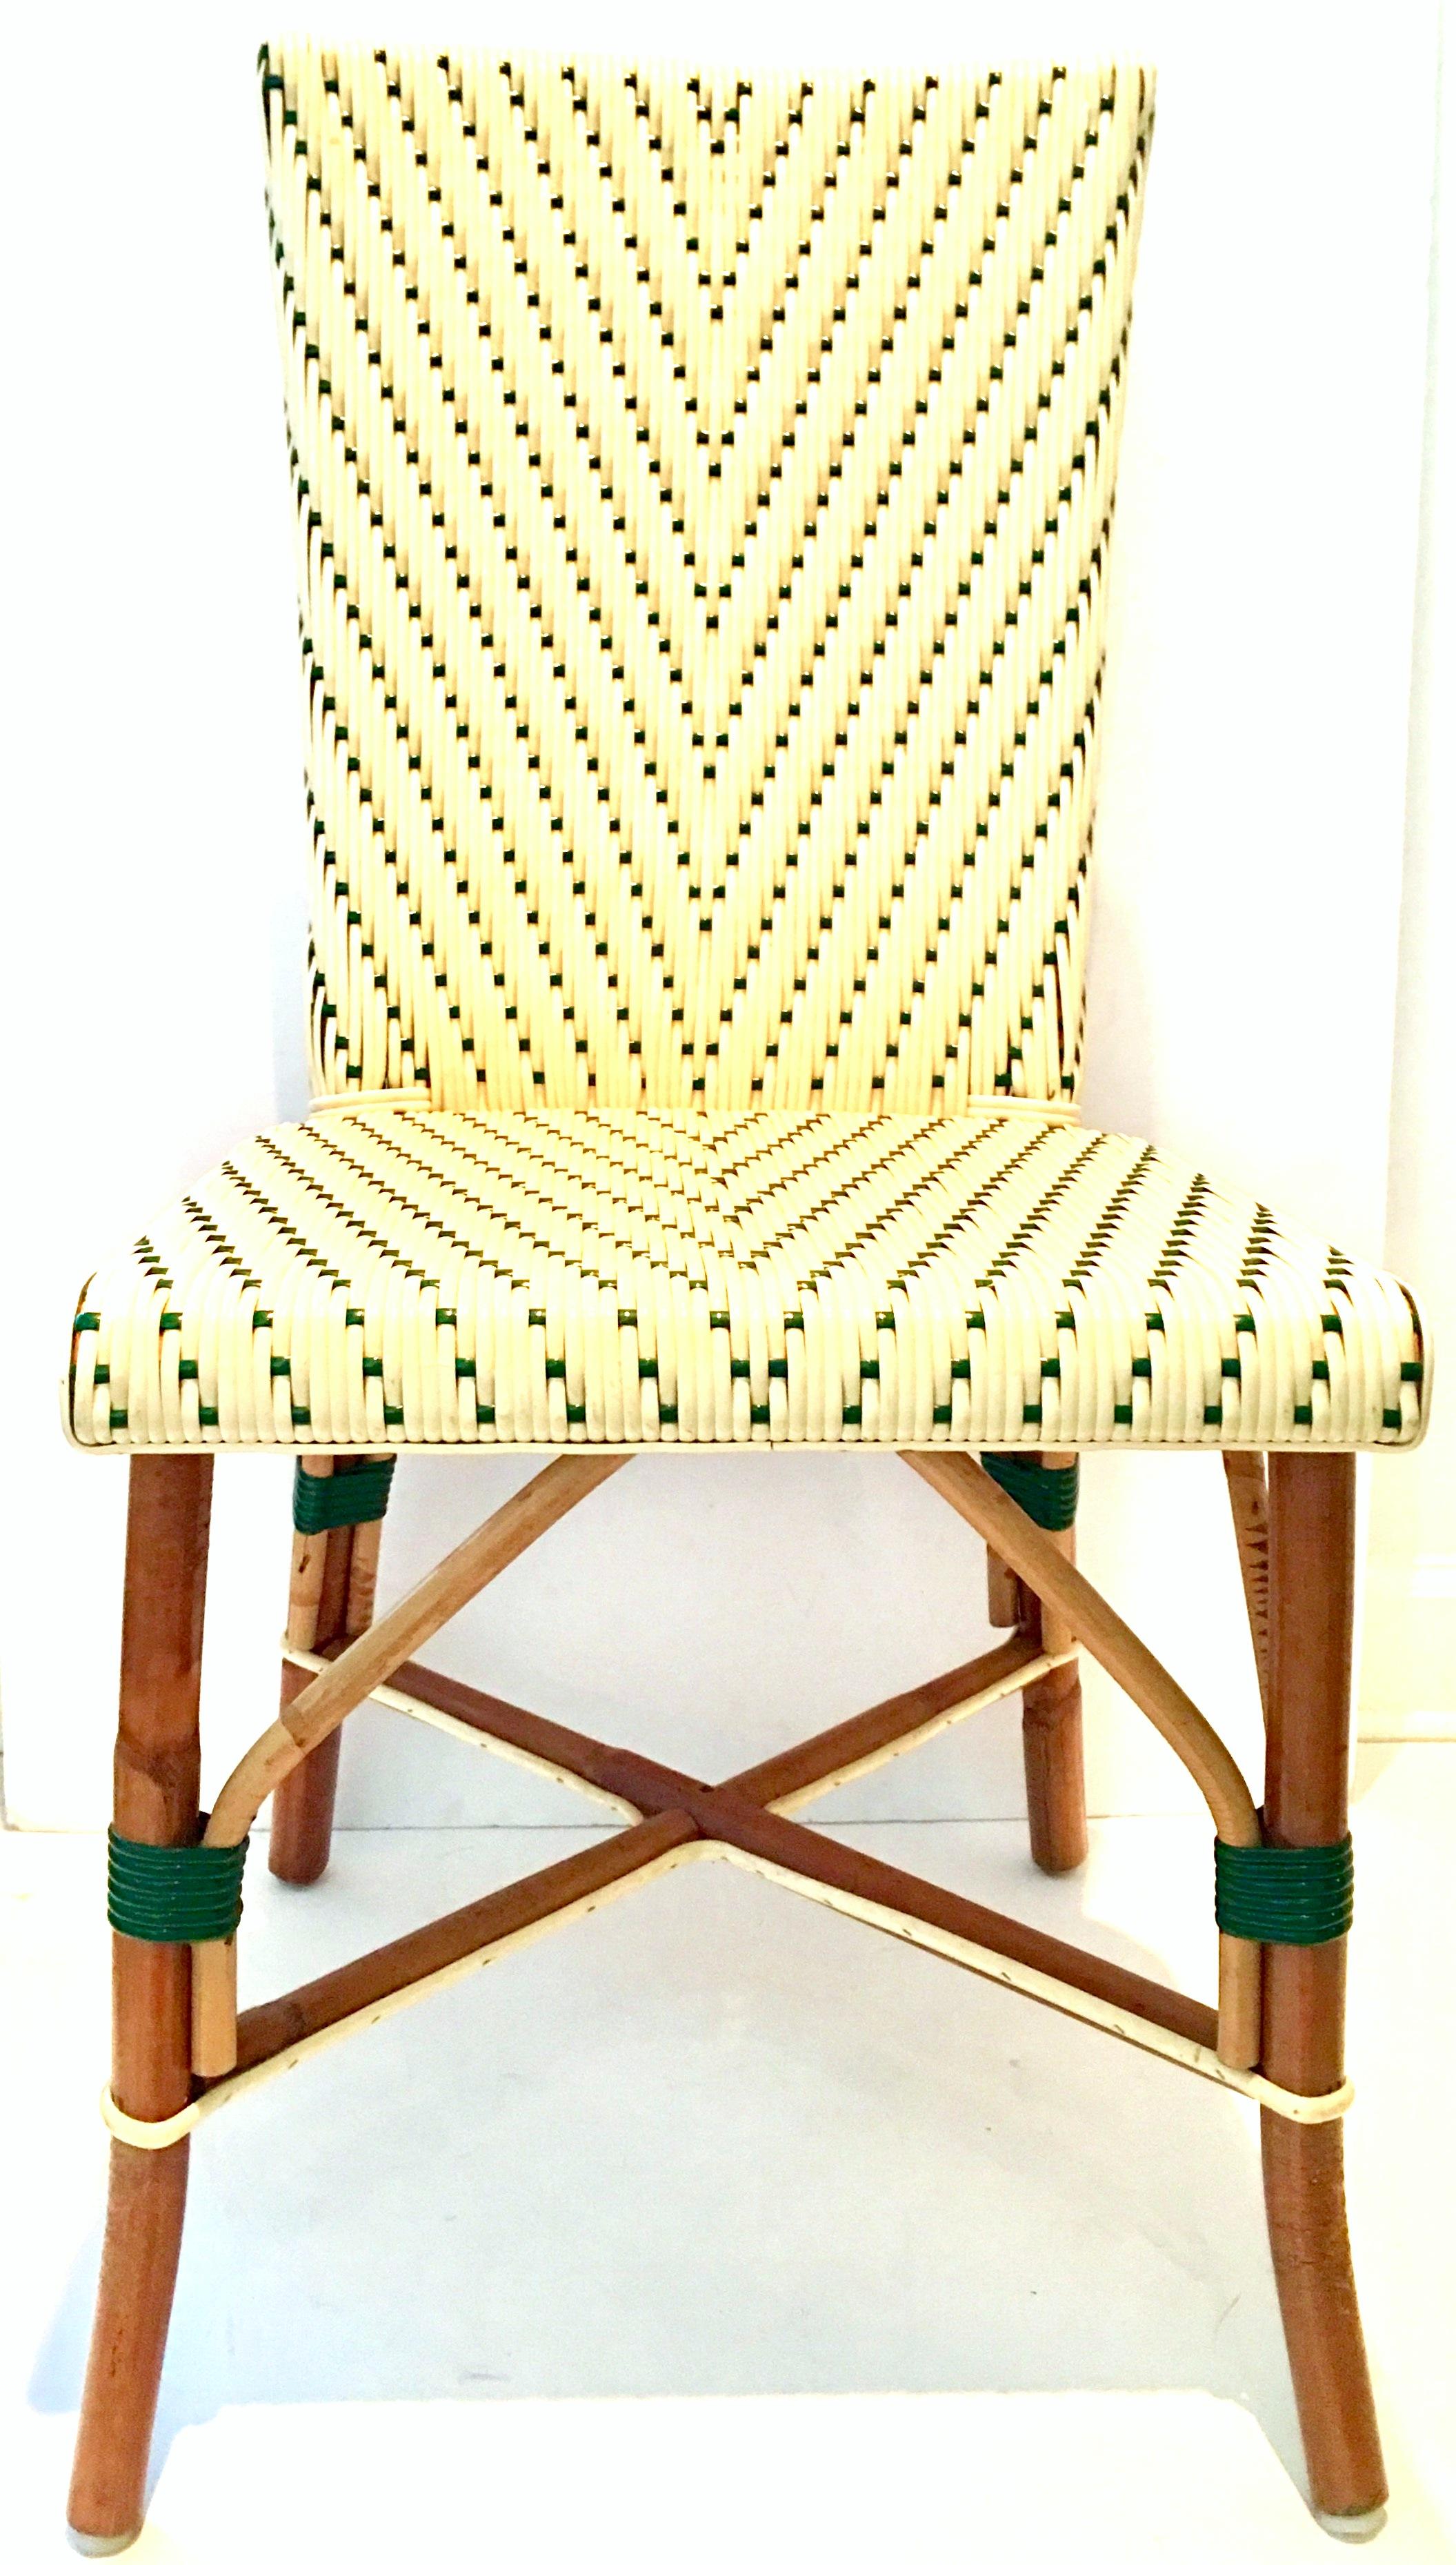 20th century Authentic Italian made woven vinyl and rattan Bistro chair. Hunter green and cream colored plastic handwoven back and seat with a rattan base and slanted legs. Features a cross bar rattan support. Chair is marked, Made in Italy on the